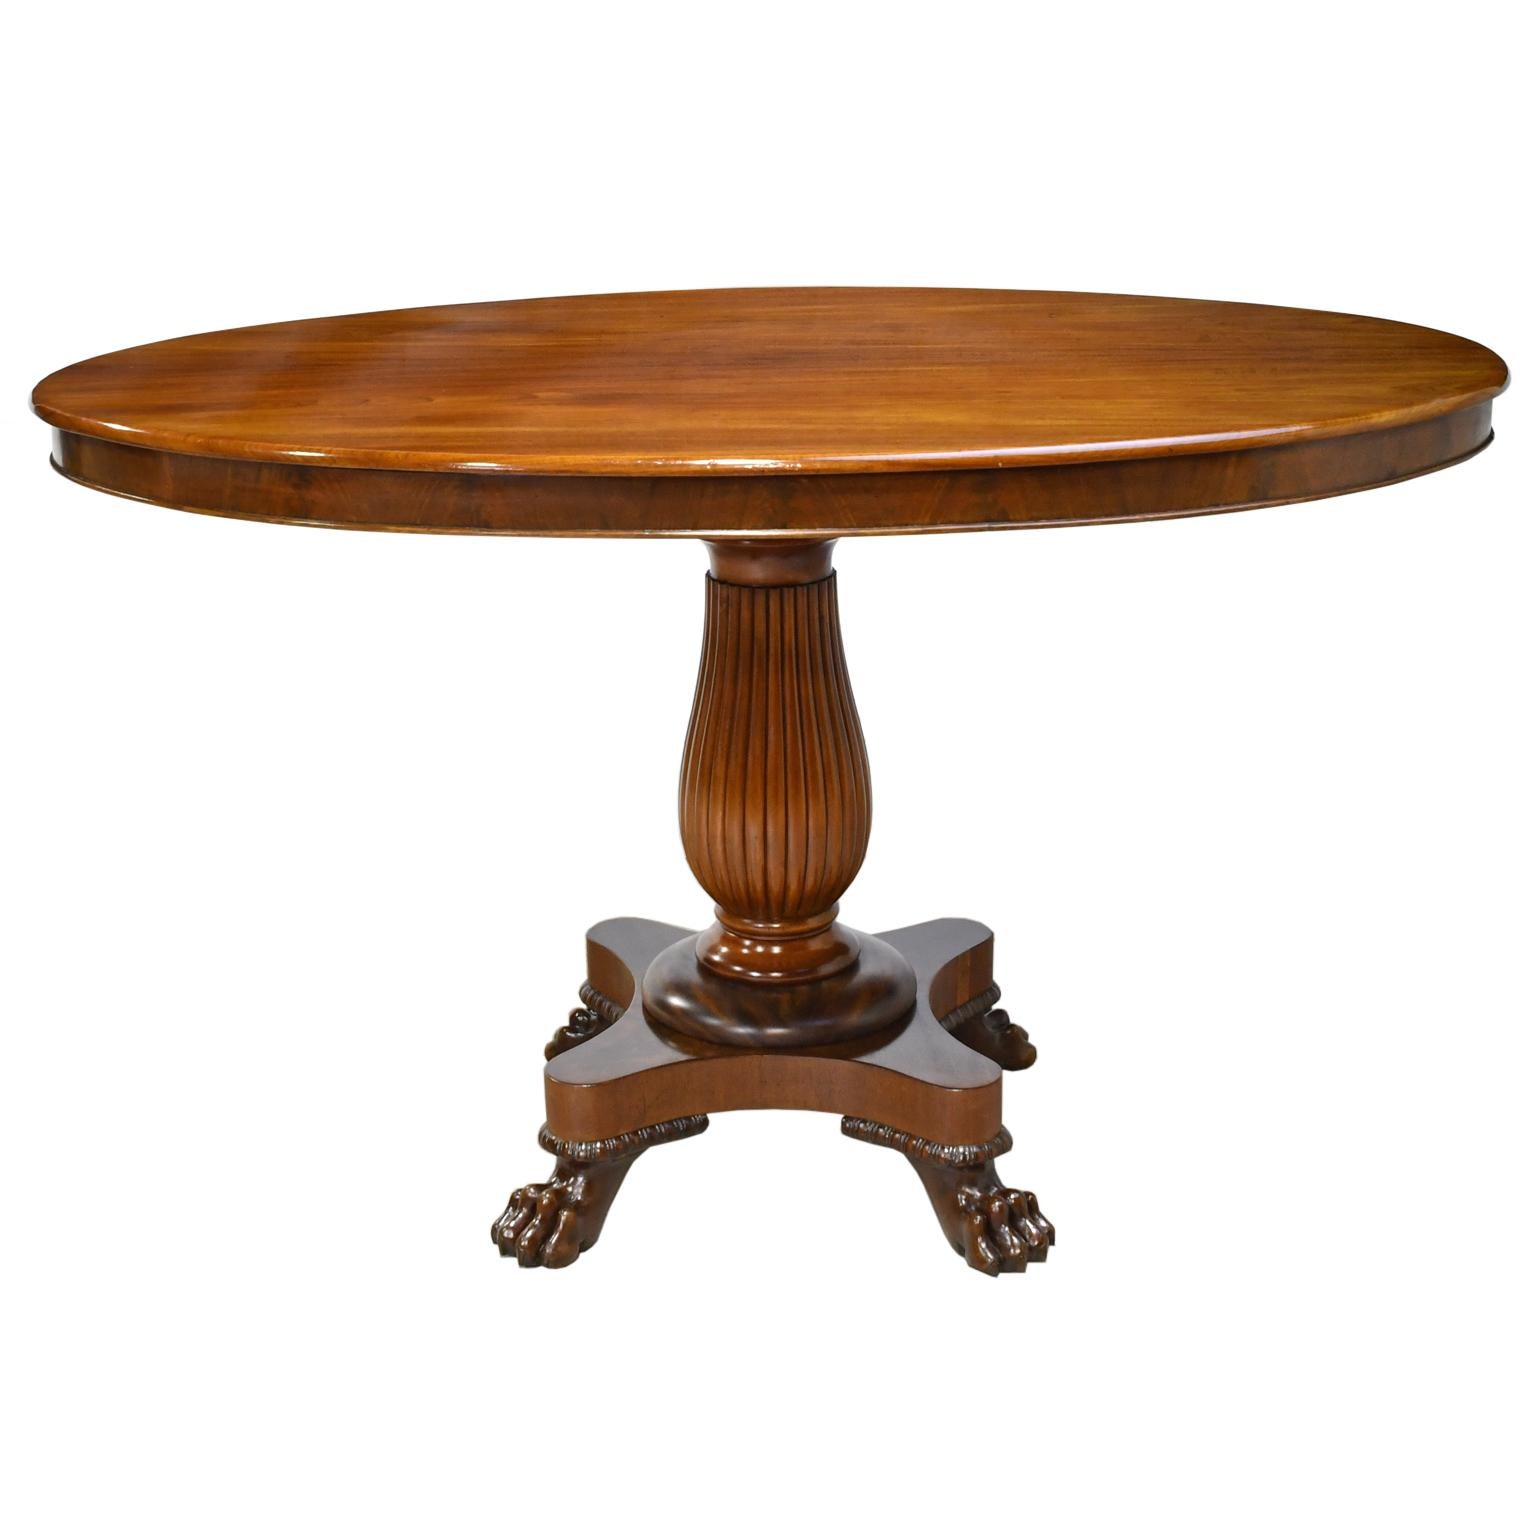 Polished Empire Pedestal Table in West Indies Mahogany w/ Oval Top, Denmark, circa 1825